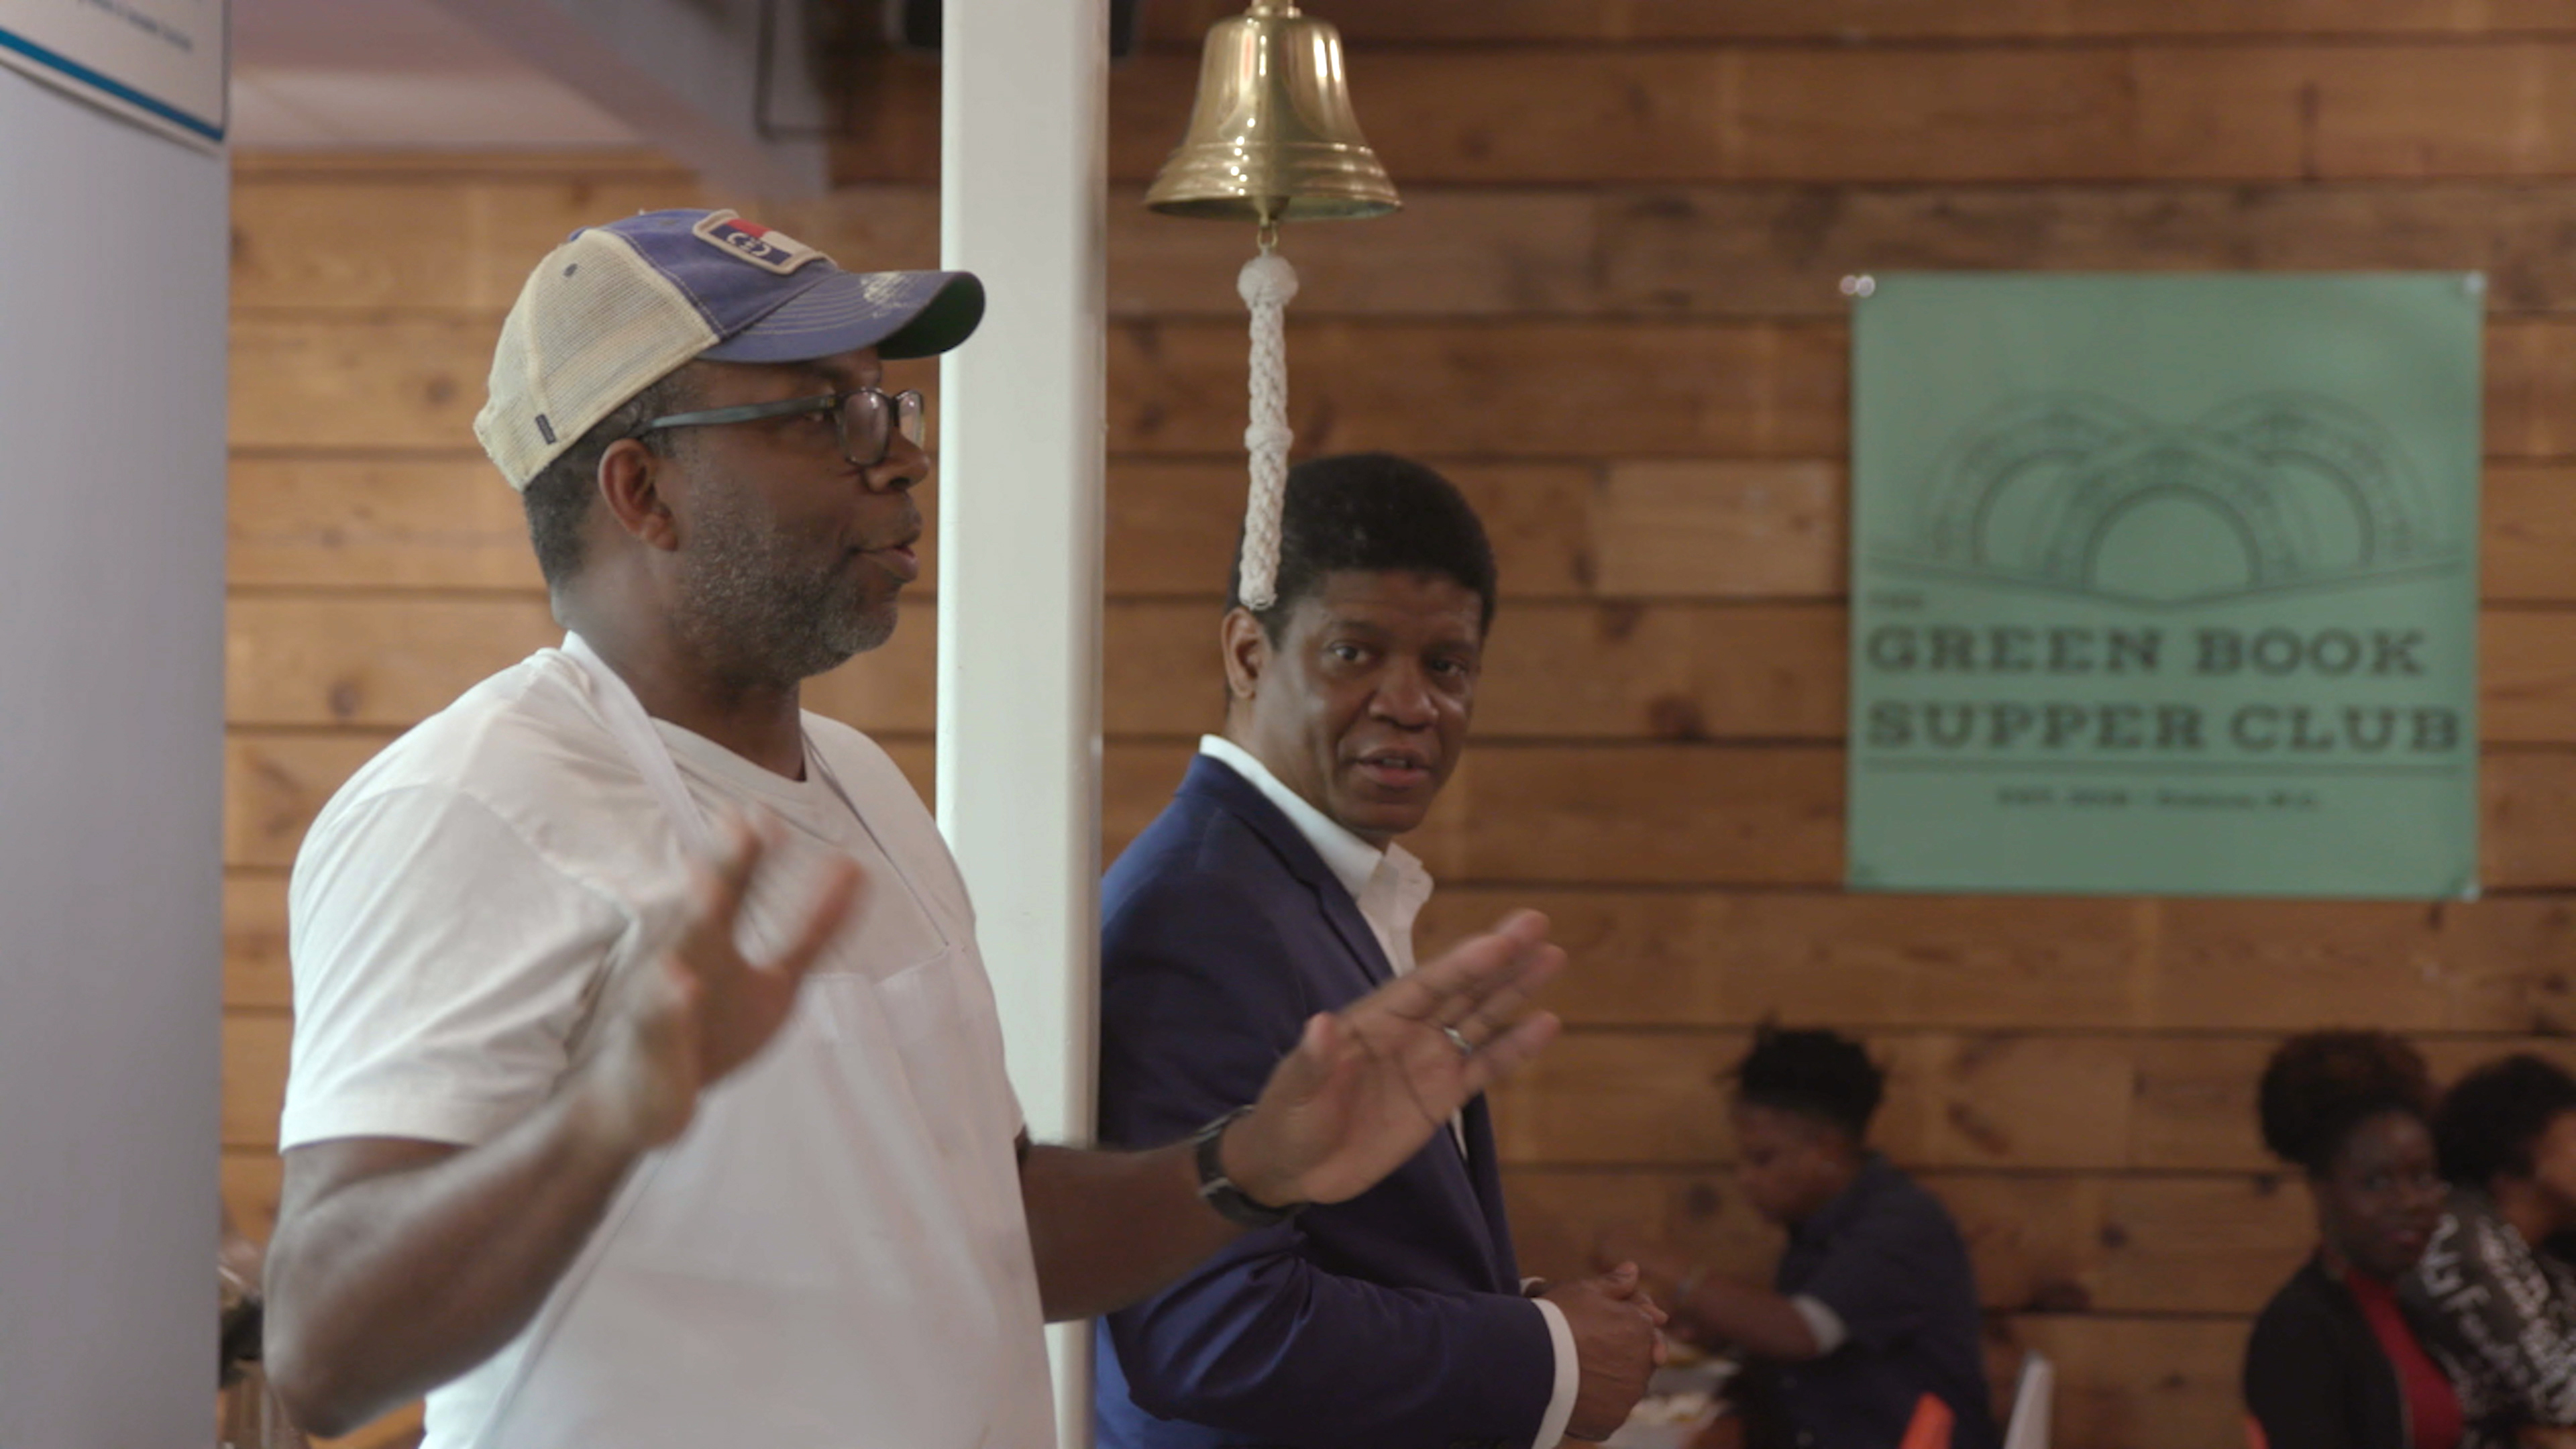 Celebrate the contributions of black chefs and fishermen to seafood culture